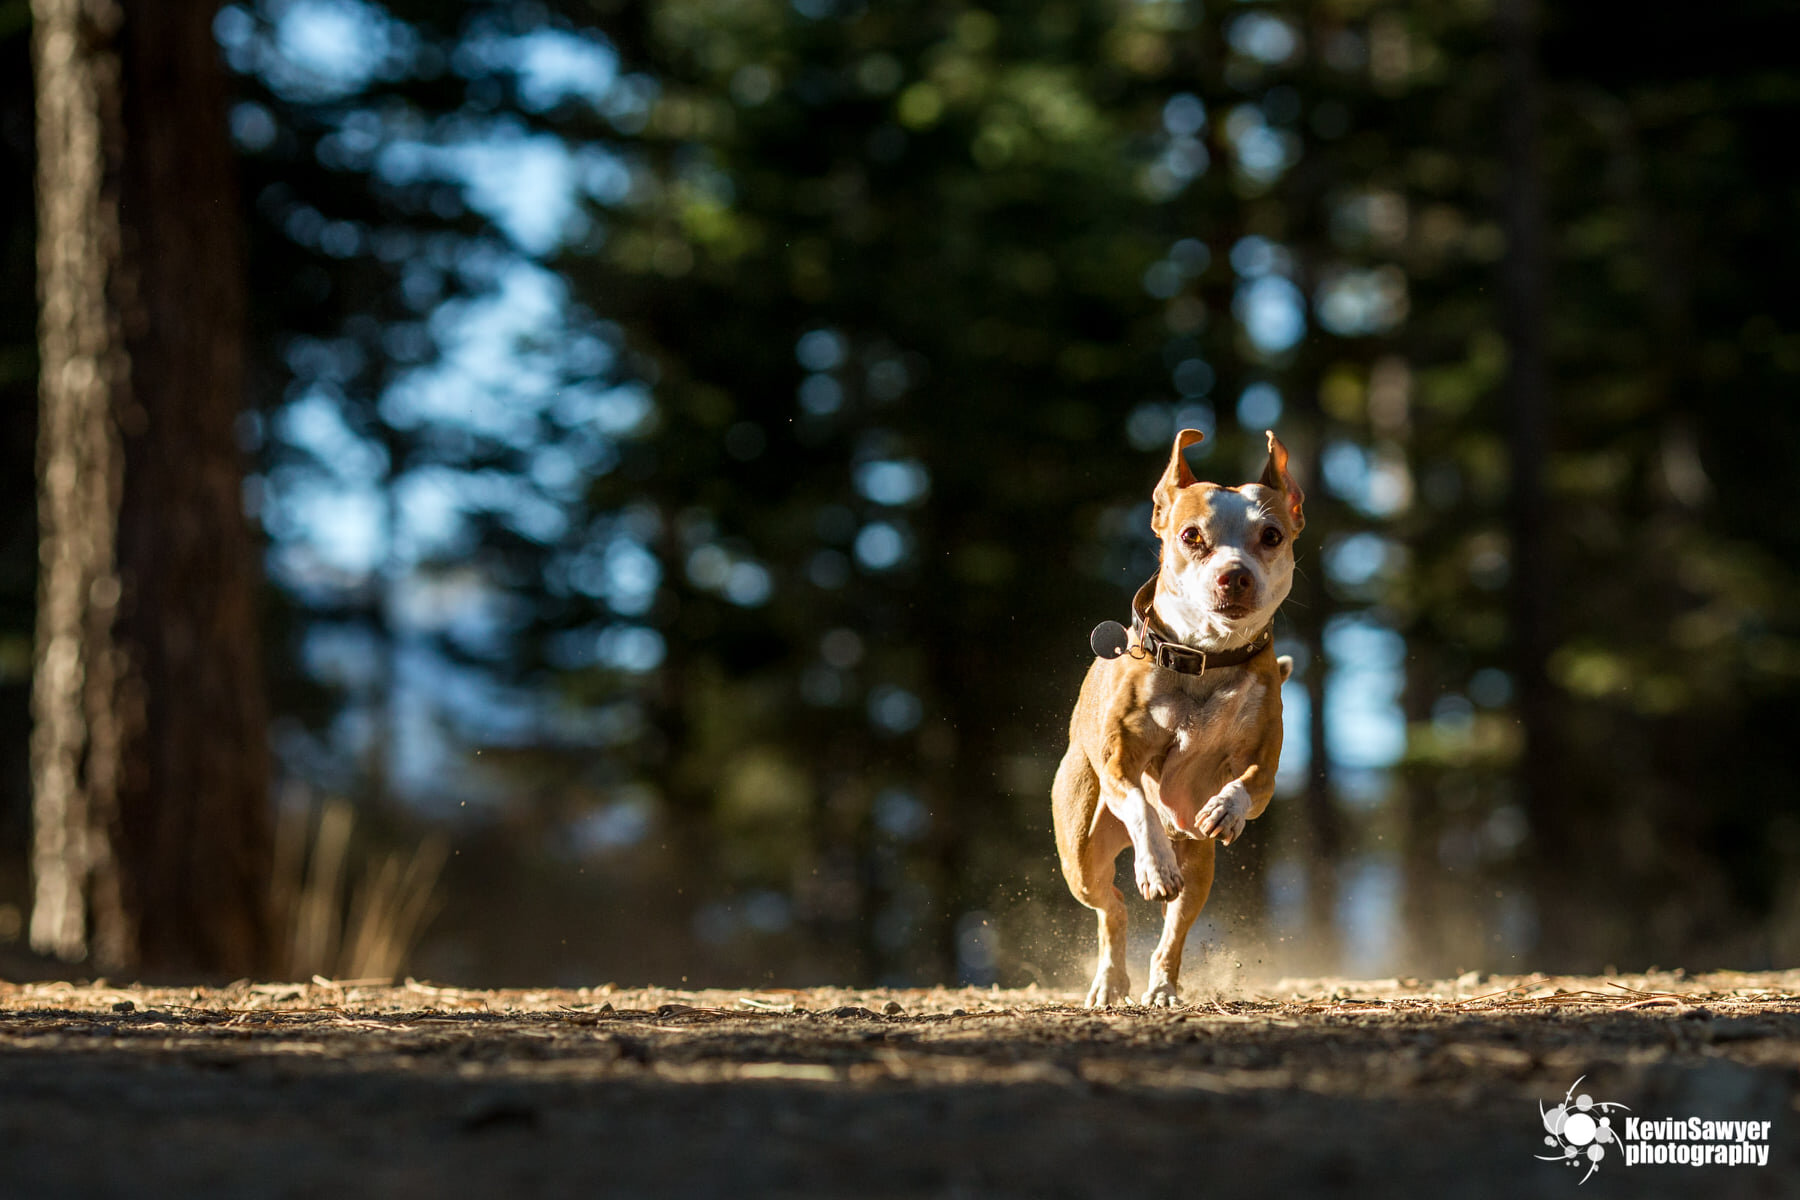 Lake-tahoe-dog-photographer-photography-truckee-reno-city-north-south-canine-puppy-pet